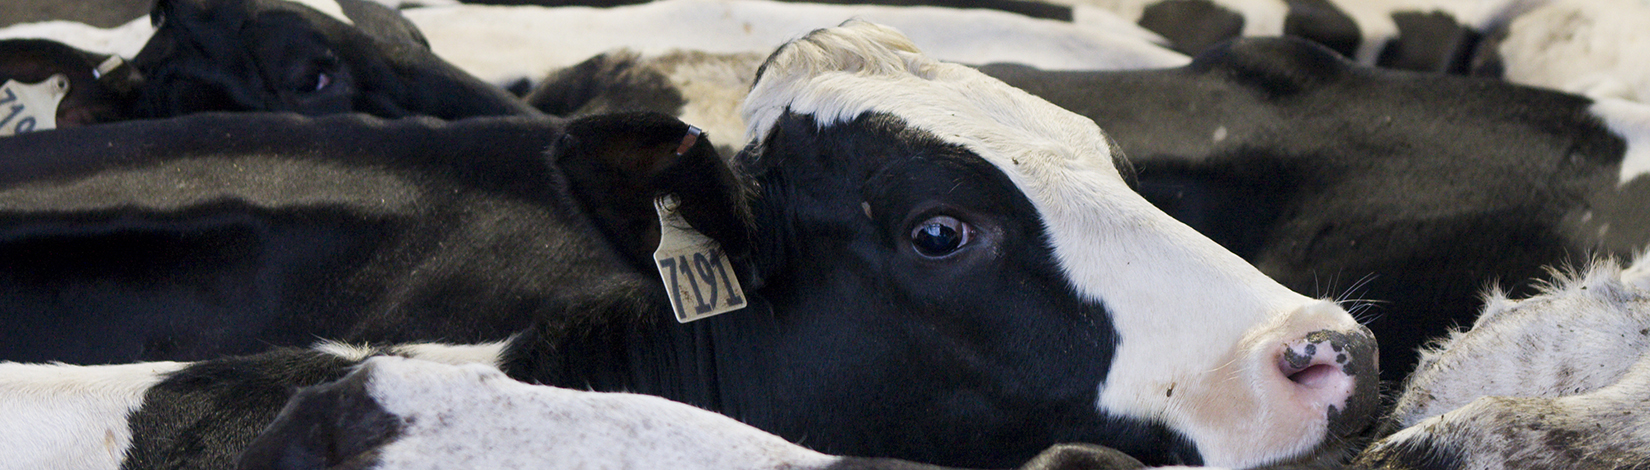 closeup photo of black and white dairy cow